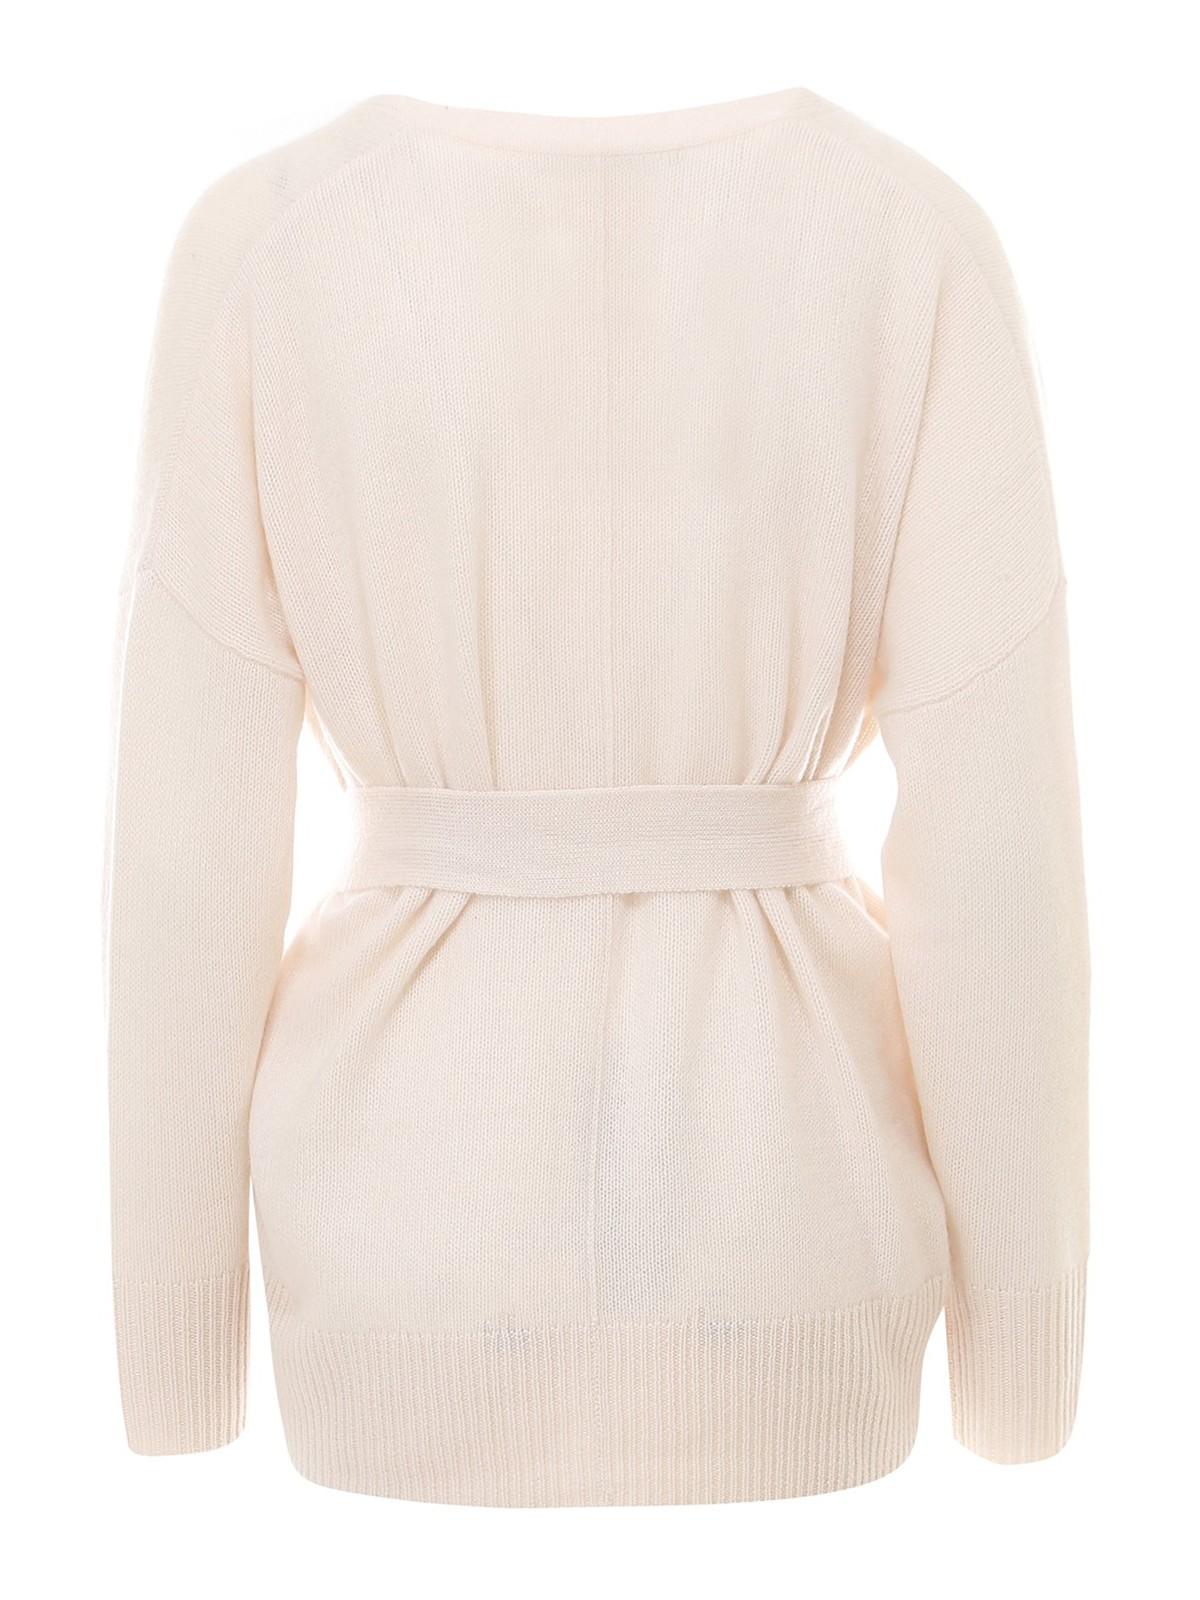 360cashmere Belted Cashmere Cardigan in White - Lyst